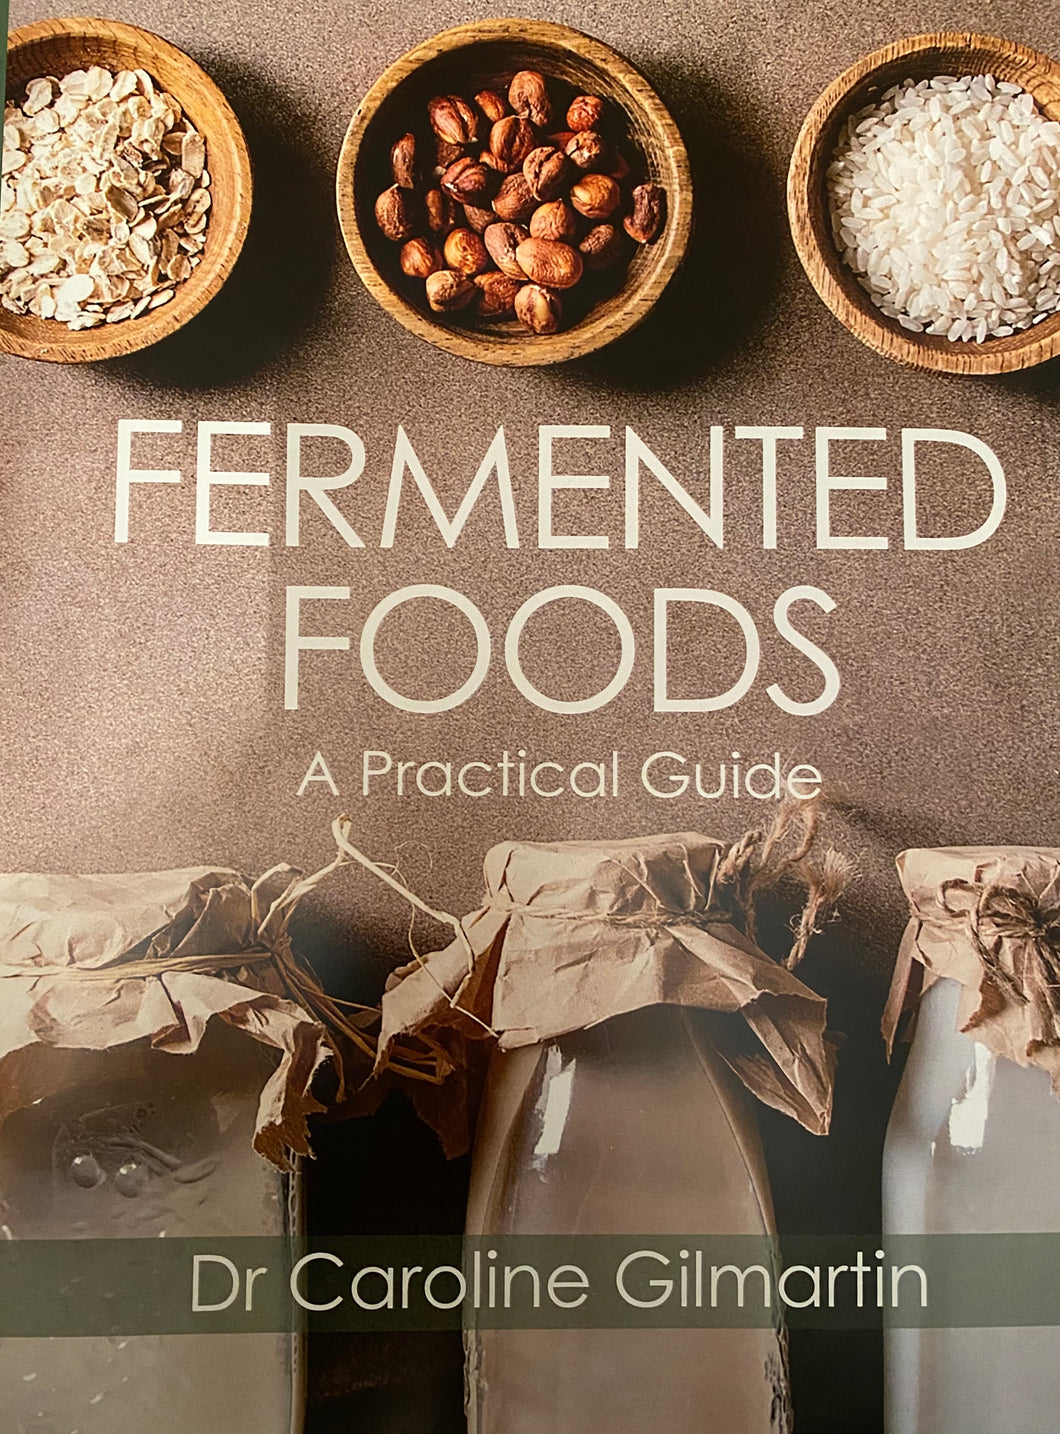 THE BOOK!  Fermented Foods; a practical guide